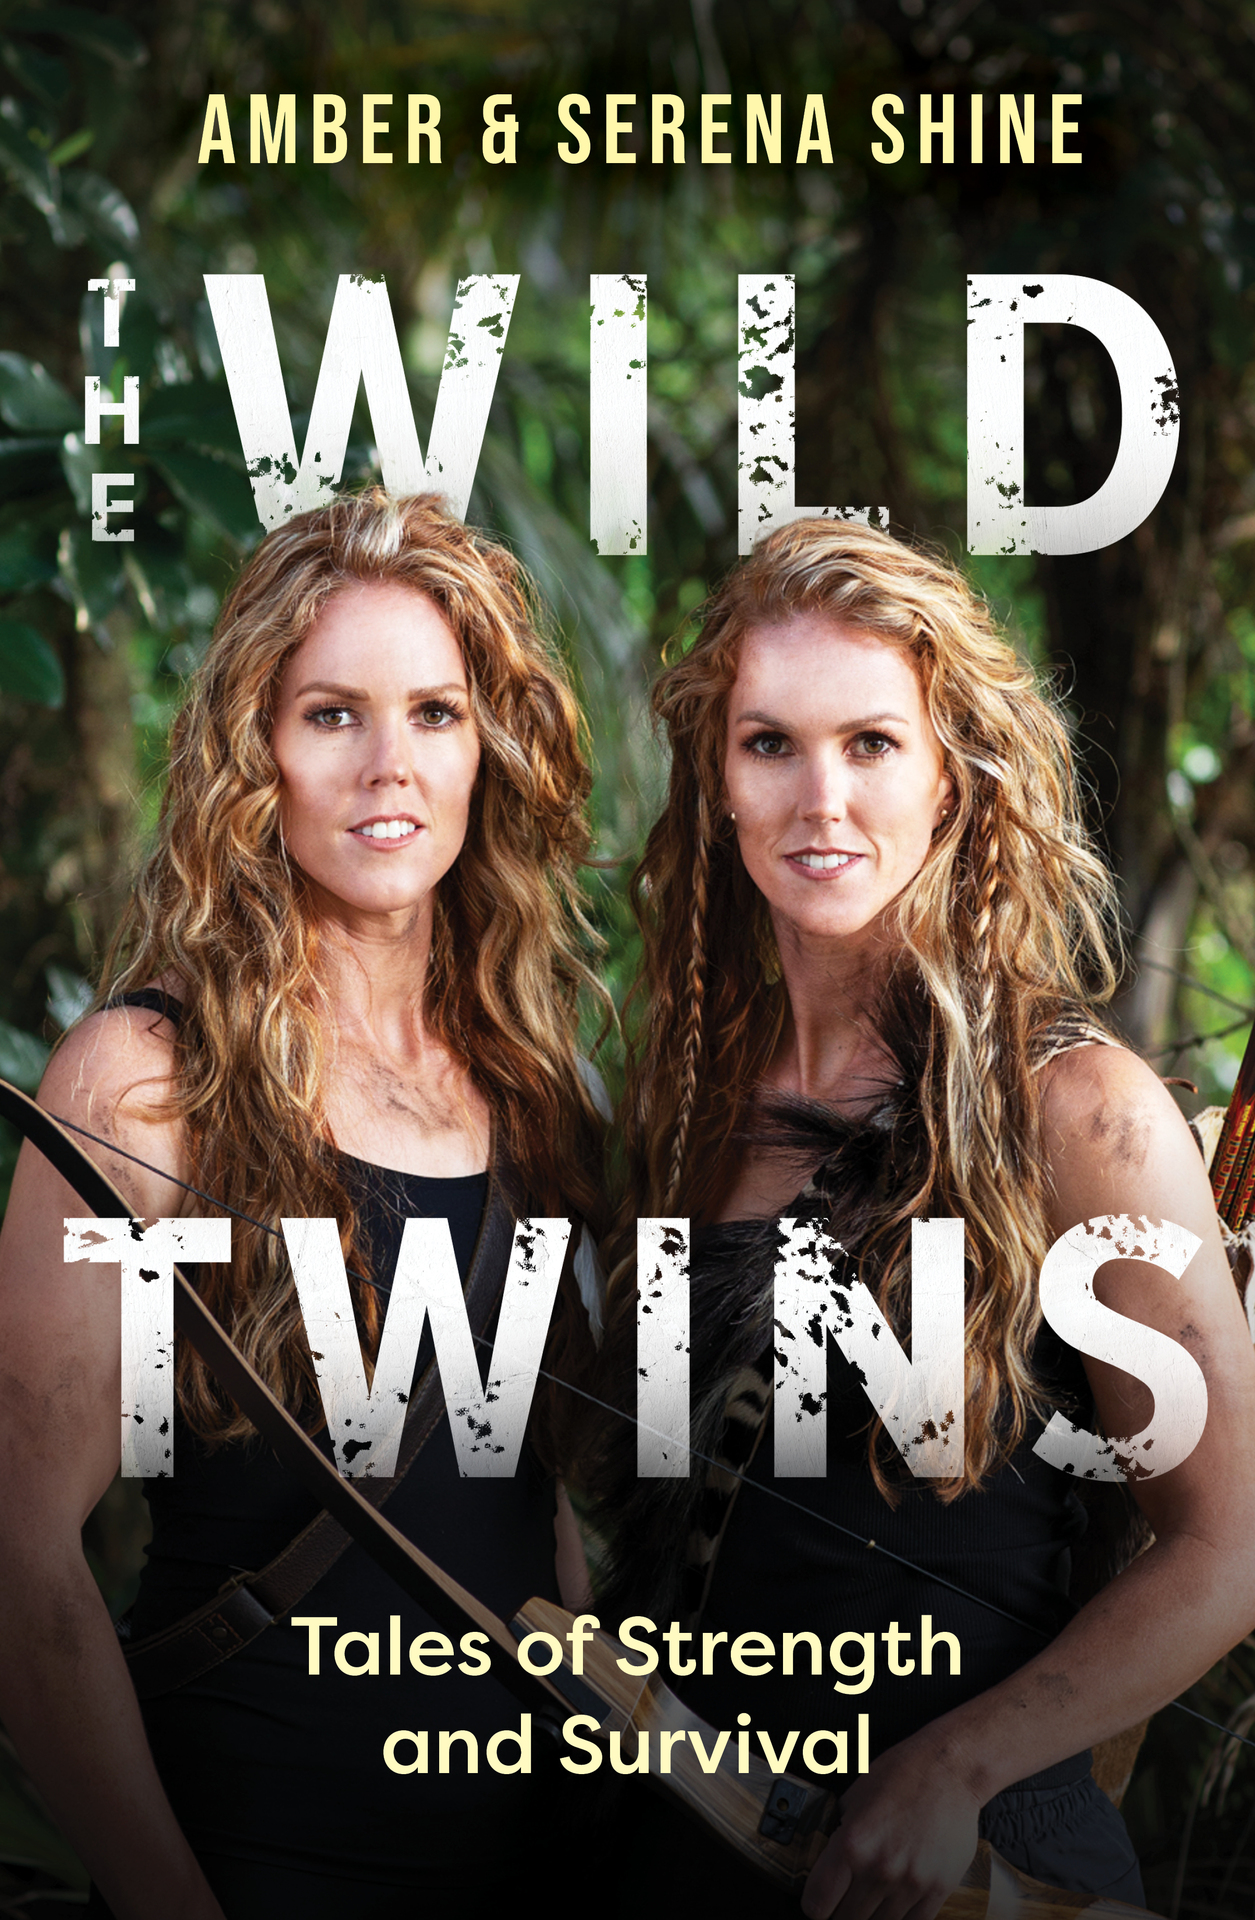 New zealand twins amber and serena